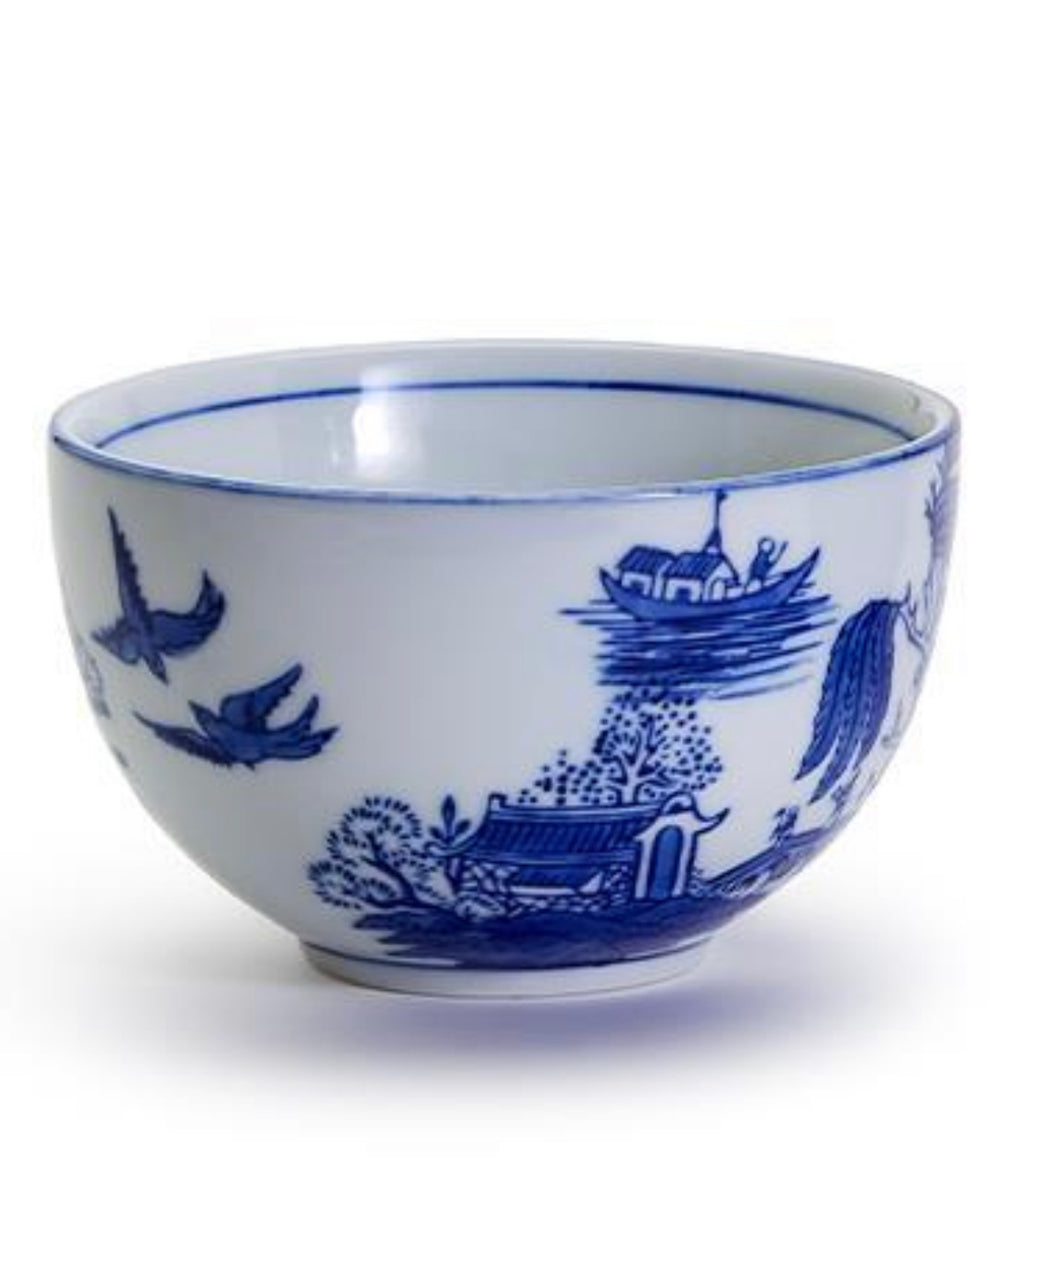 Chinoiserie Bowl, Blue Willow Motif